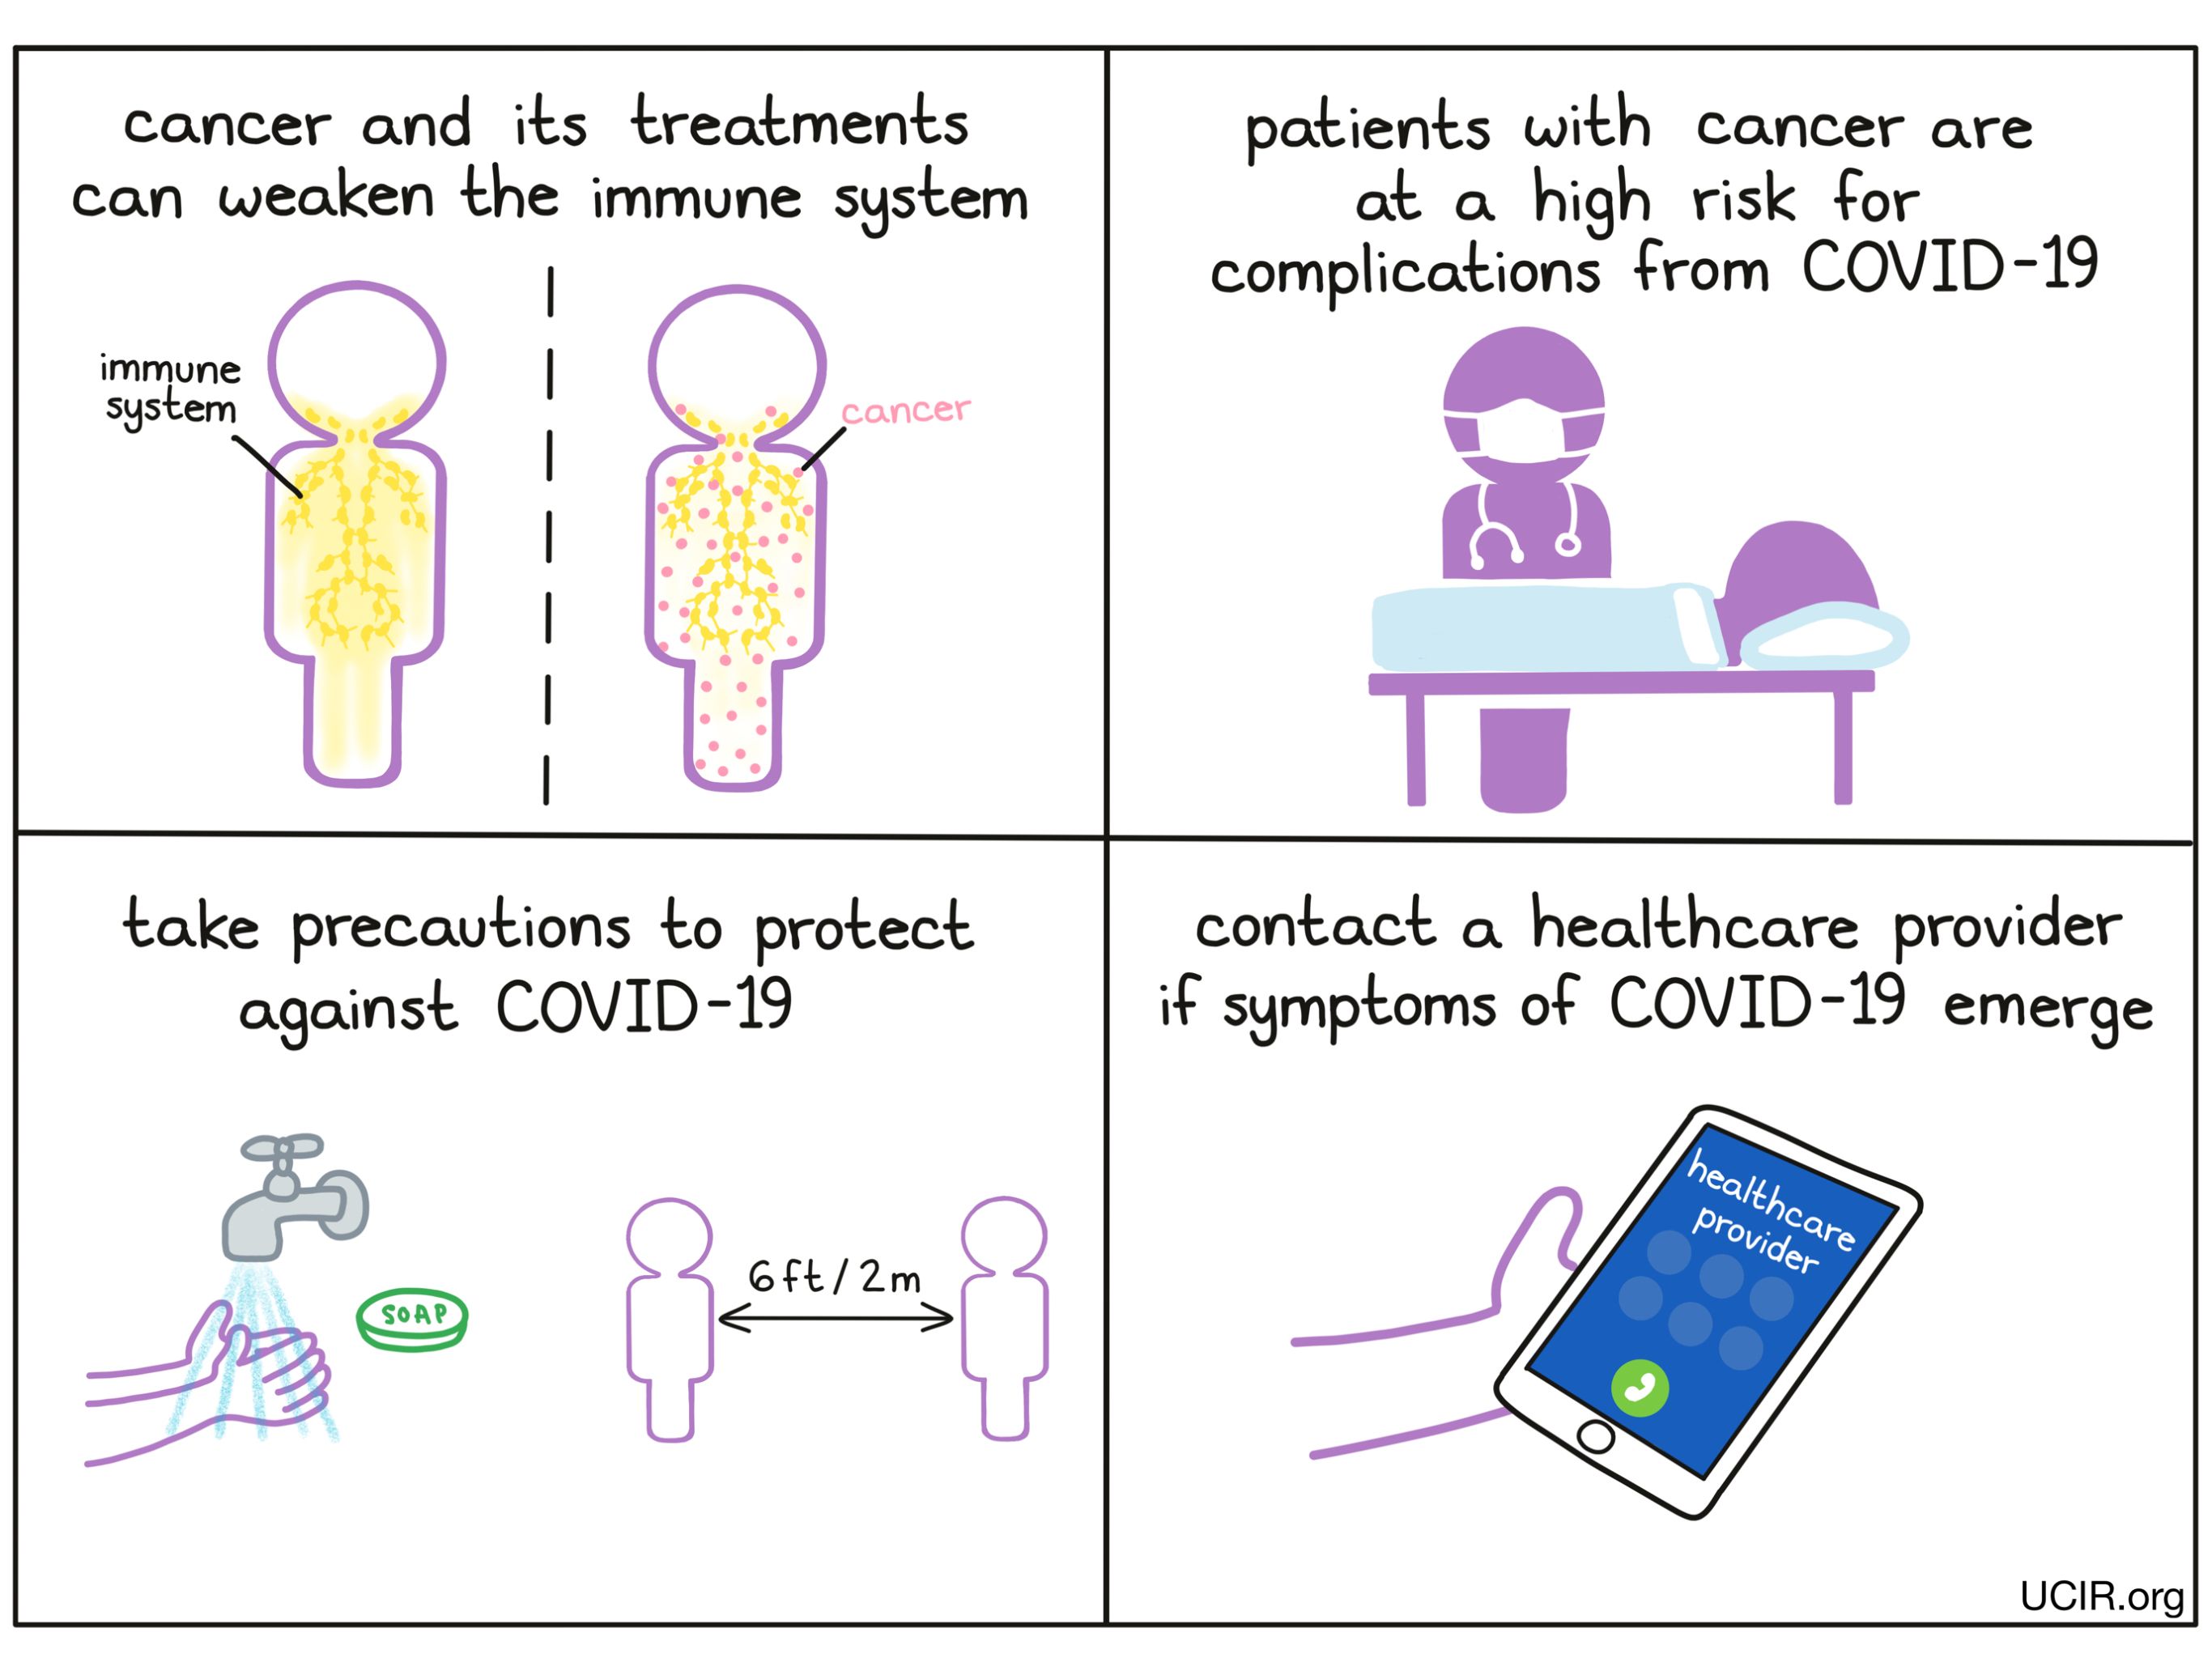 COVID-19: Implications and Guidance for Patients Treated with Immunotherapy